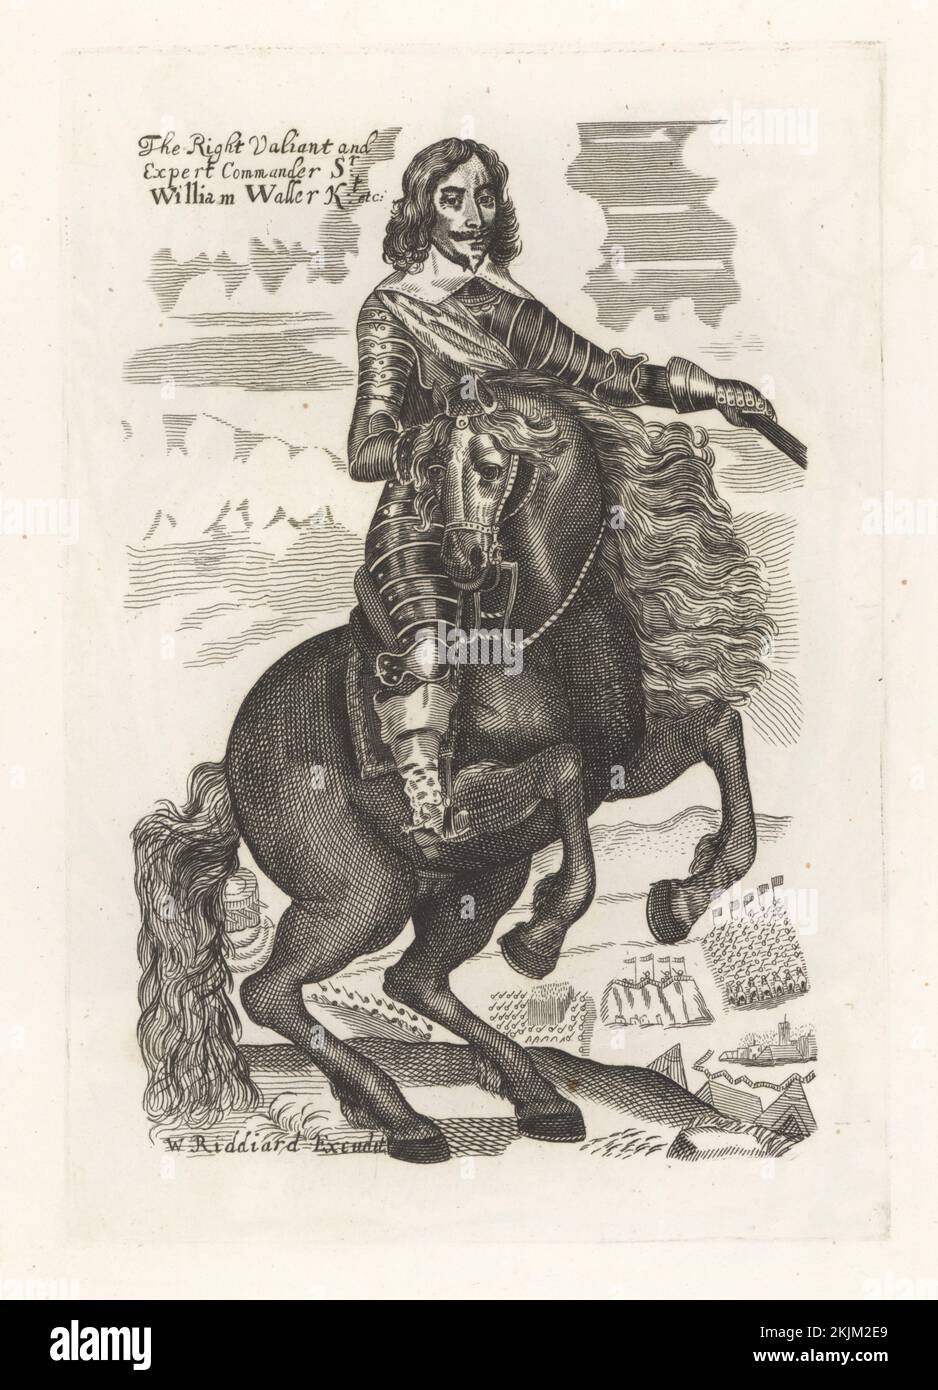 Sir William Waller, English soldier, c. 1597-1668. Commander of Parliamentarian armies during the First English Civil War. On horseback in plate armour, sash, collar and boots with spurs. Vignette of miltary camps and battles. The right valiant and expert commander. Published by William Riddiard, from the unique equestrian print in Earl Spenser's Clarendon. Copperplate engraving from Samuel Woodburn’s Gallery of Rare Portraits Consisting of Original Plates, George Jones, 102 St Martin’s Lane, London, 1816. Stock Photo